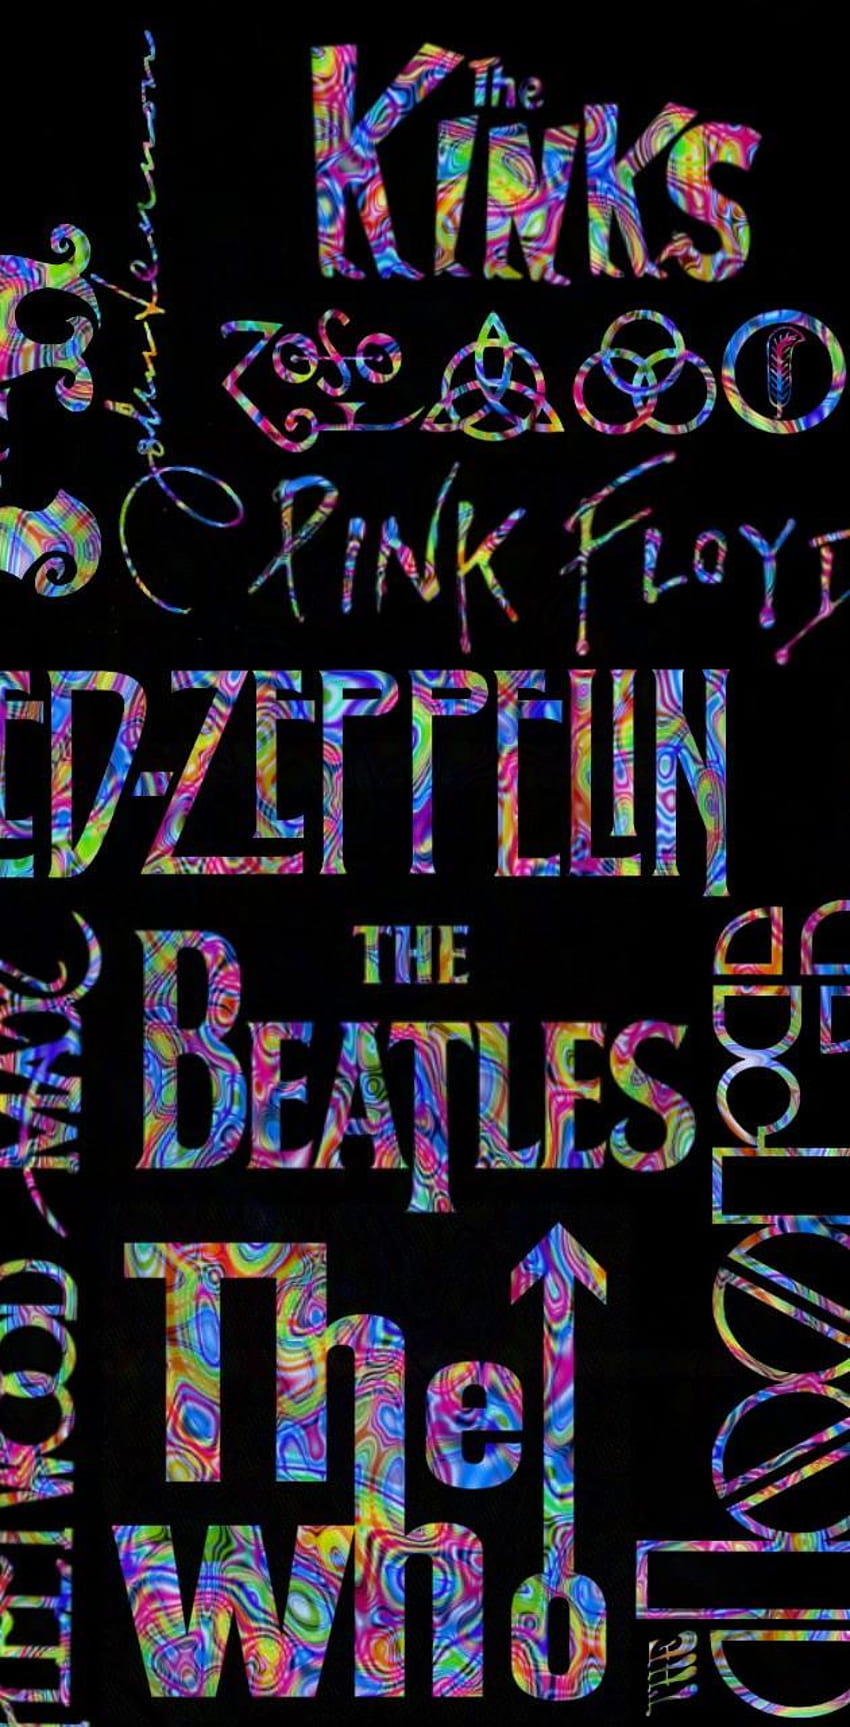 Psychedelic bands, The Beatles Psychedelic HD phone wallpaper